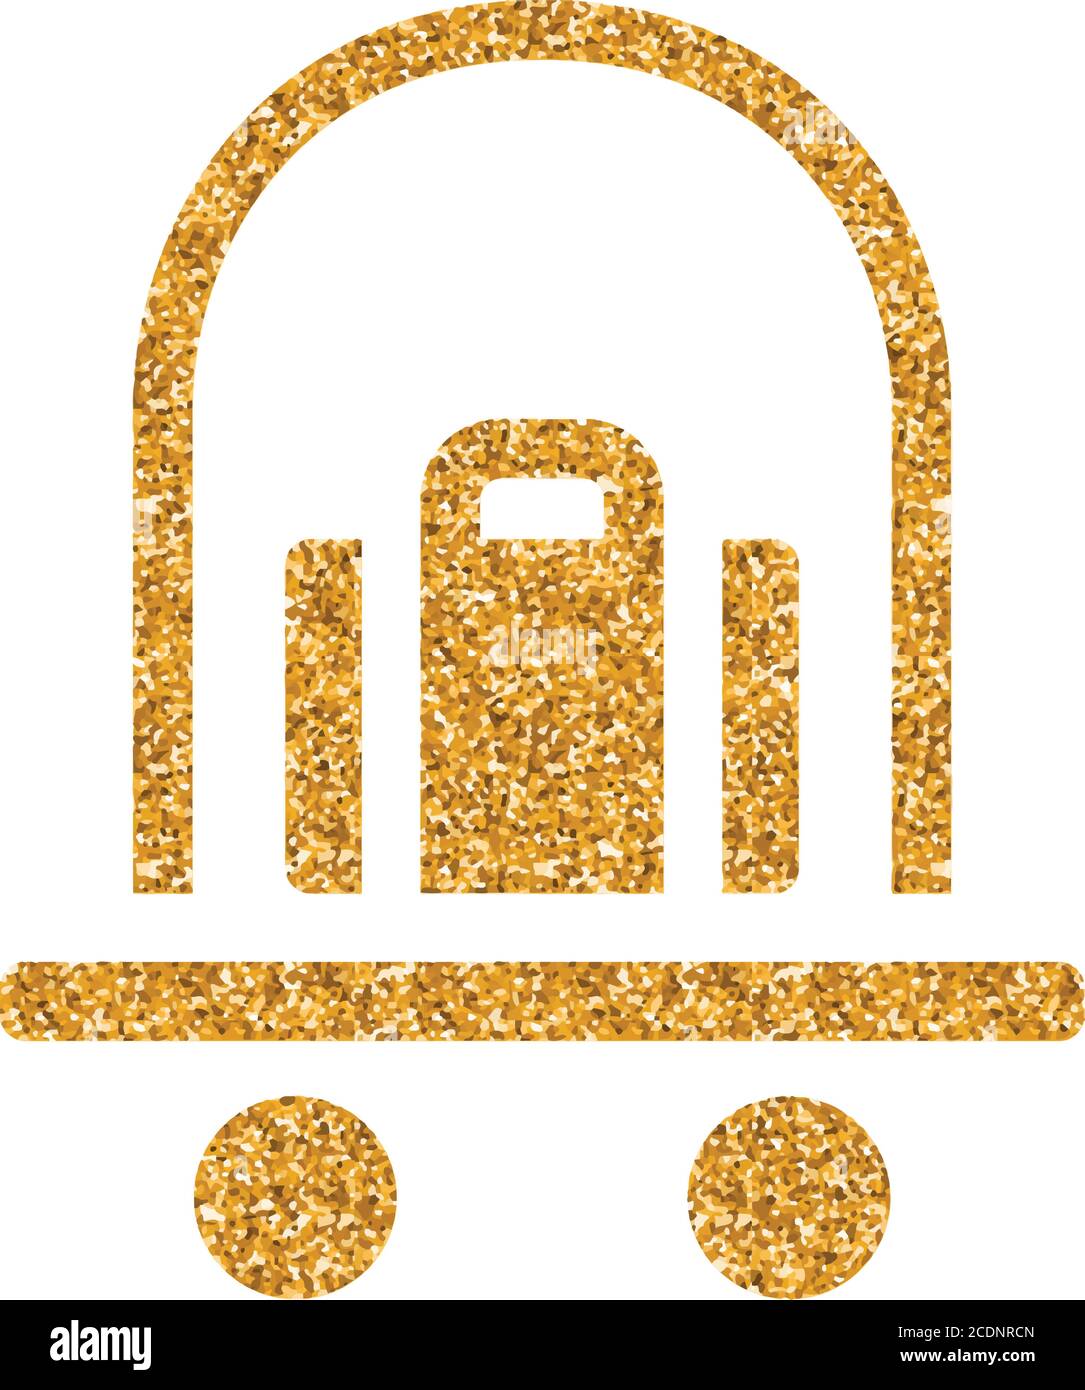 Logistic trolley icon in gold glitter texture. Sparkle luxury style vector illustration. Stock Vector